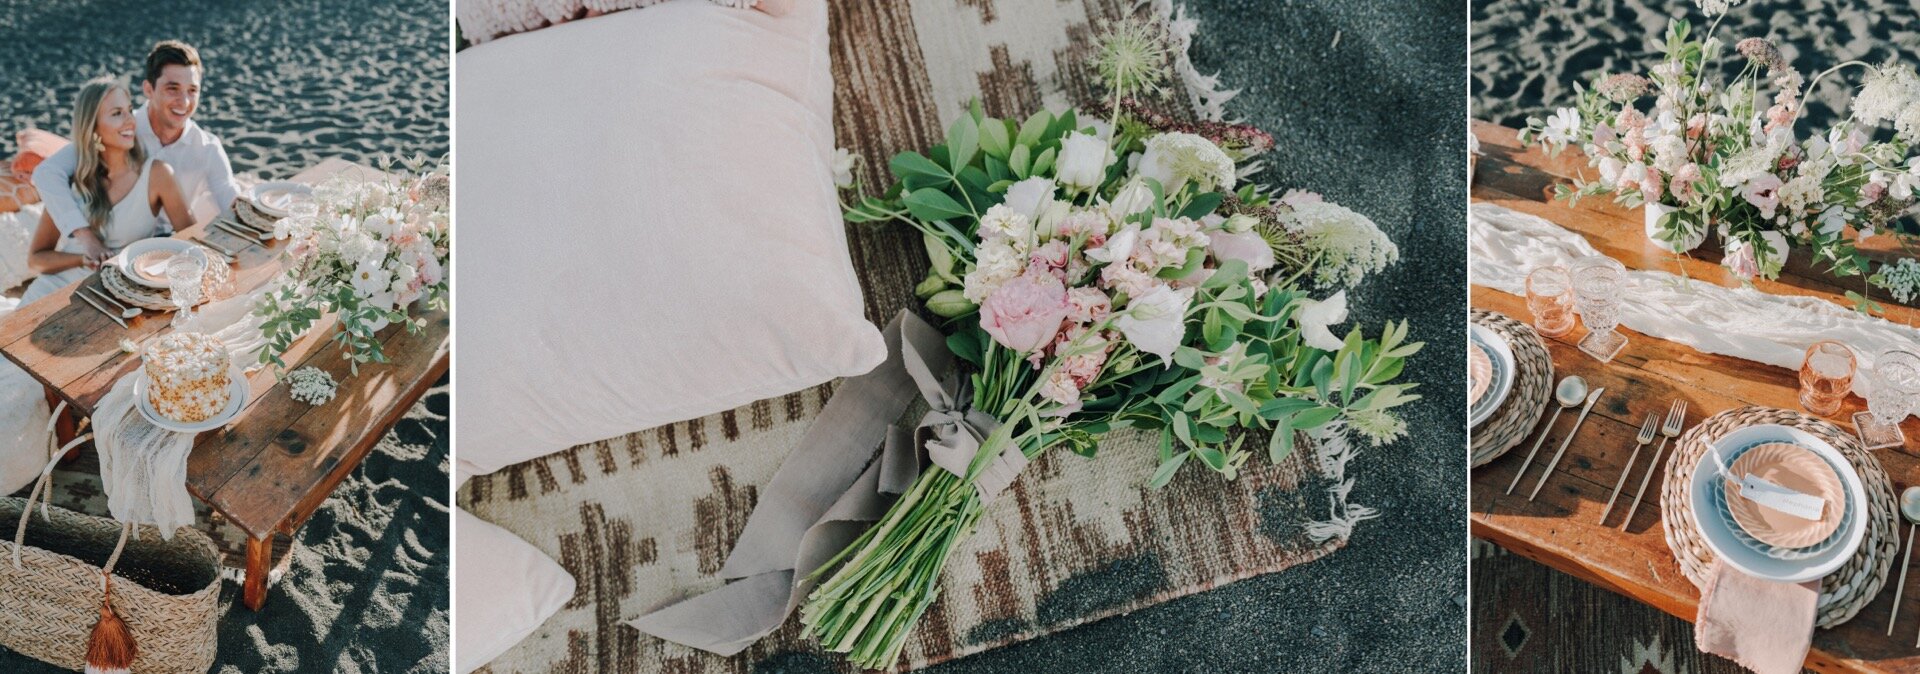 North Shore Elopement | Minne Floral Co. | Hannah Ampe Photography | Style Society MPLS